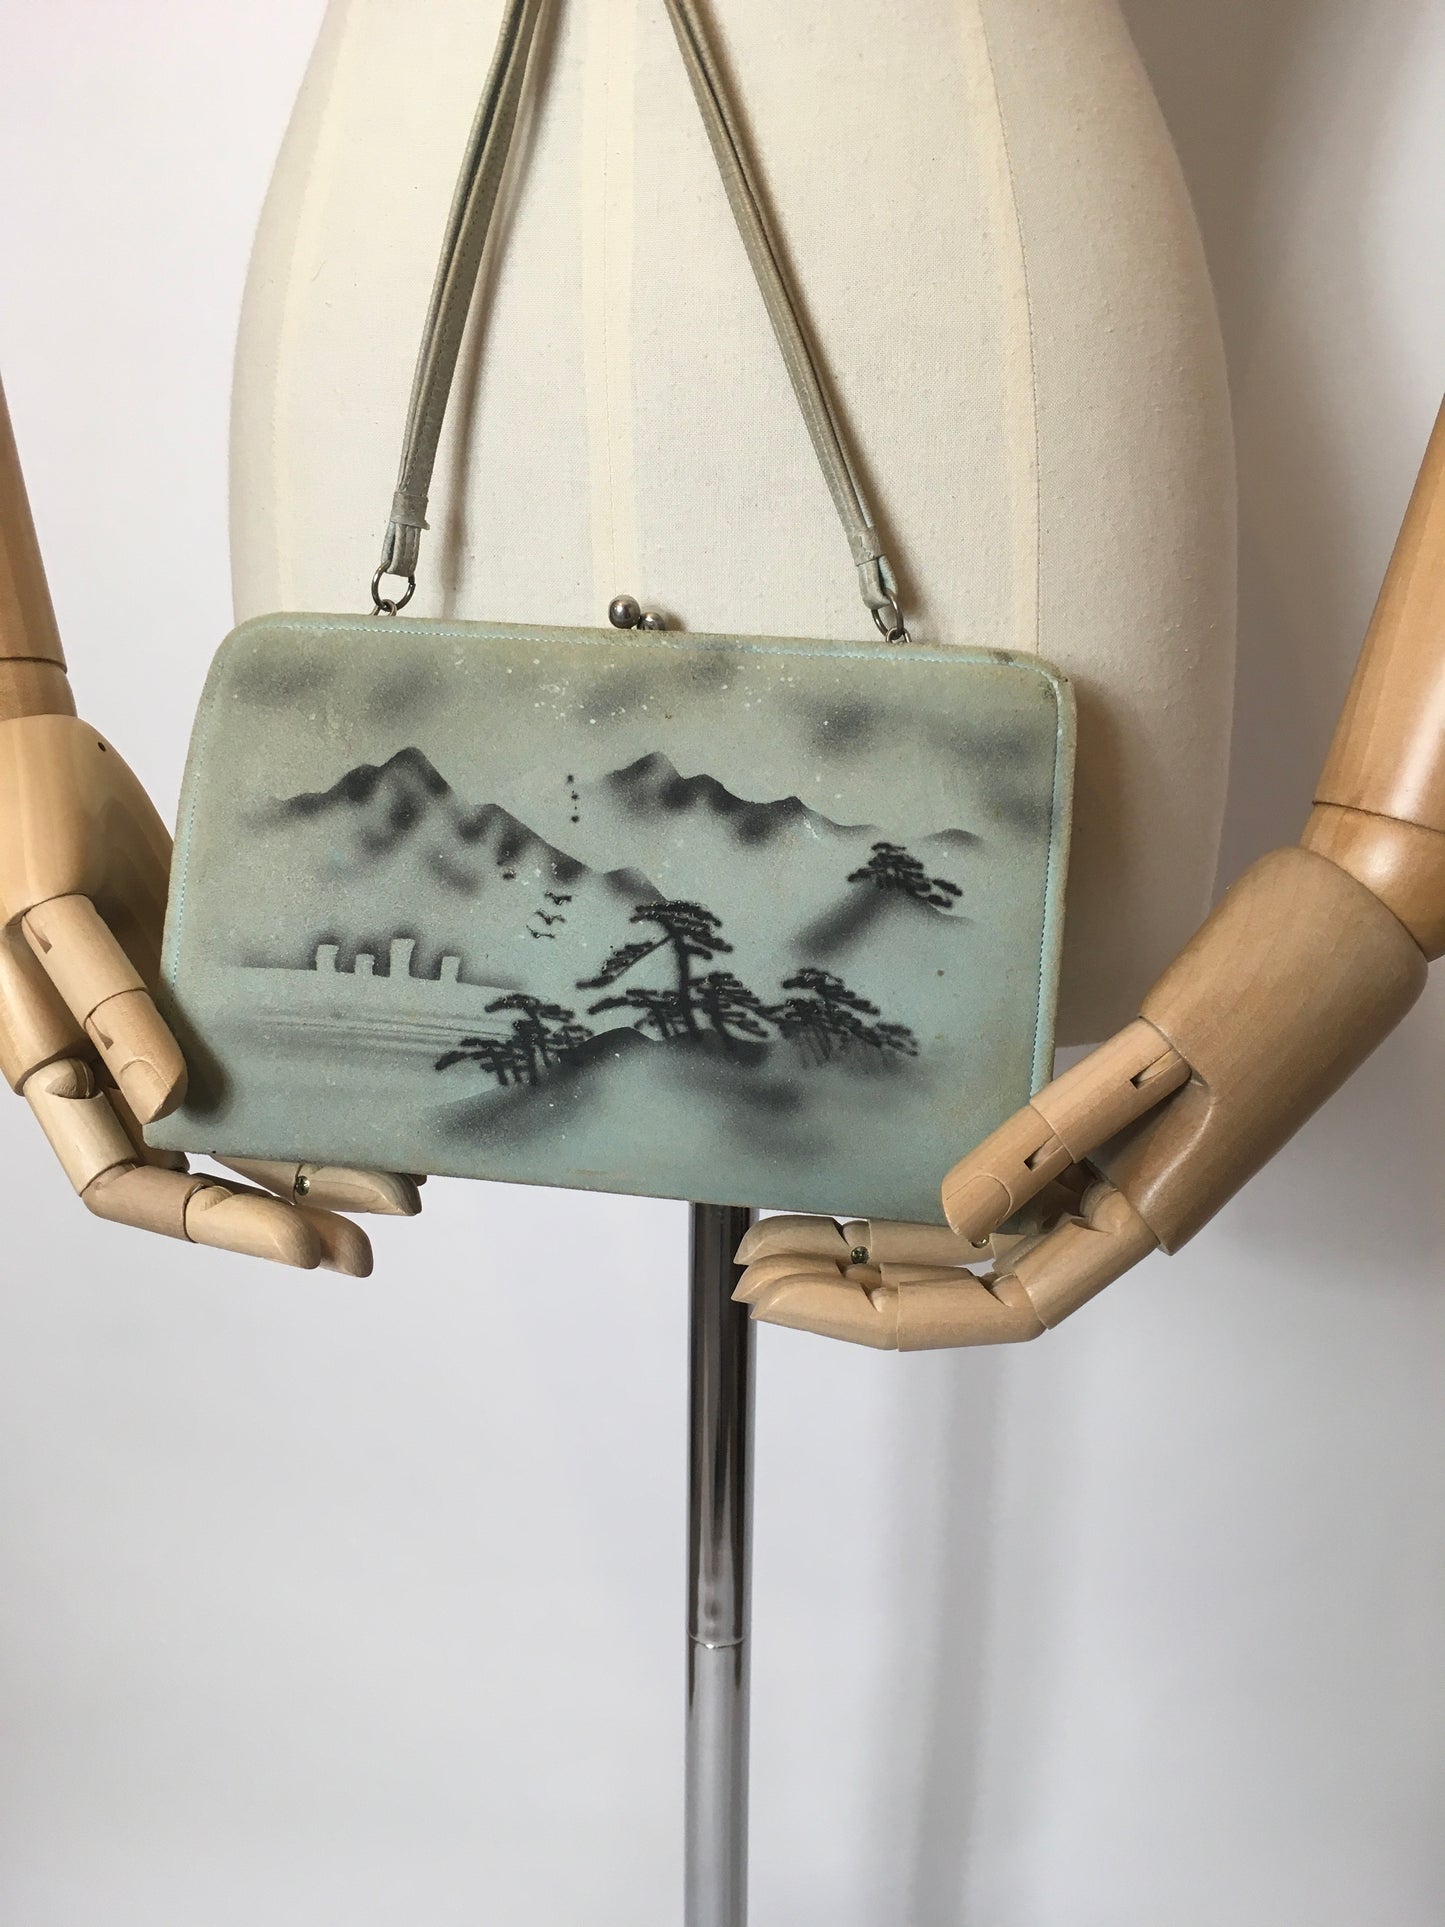 Original 1930’s Powder Blue Tourist Bag with images of Mountains and Temples  - Festival of Vintage Fashion Show Exclusive